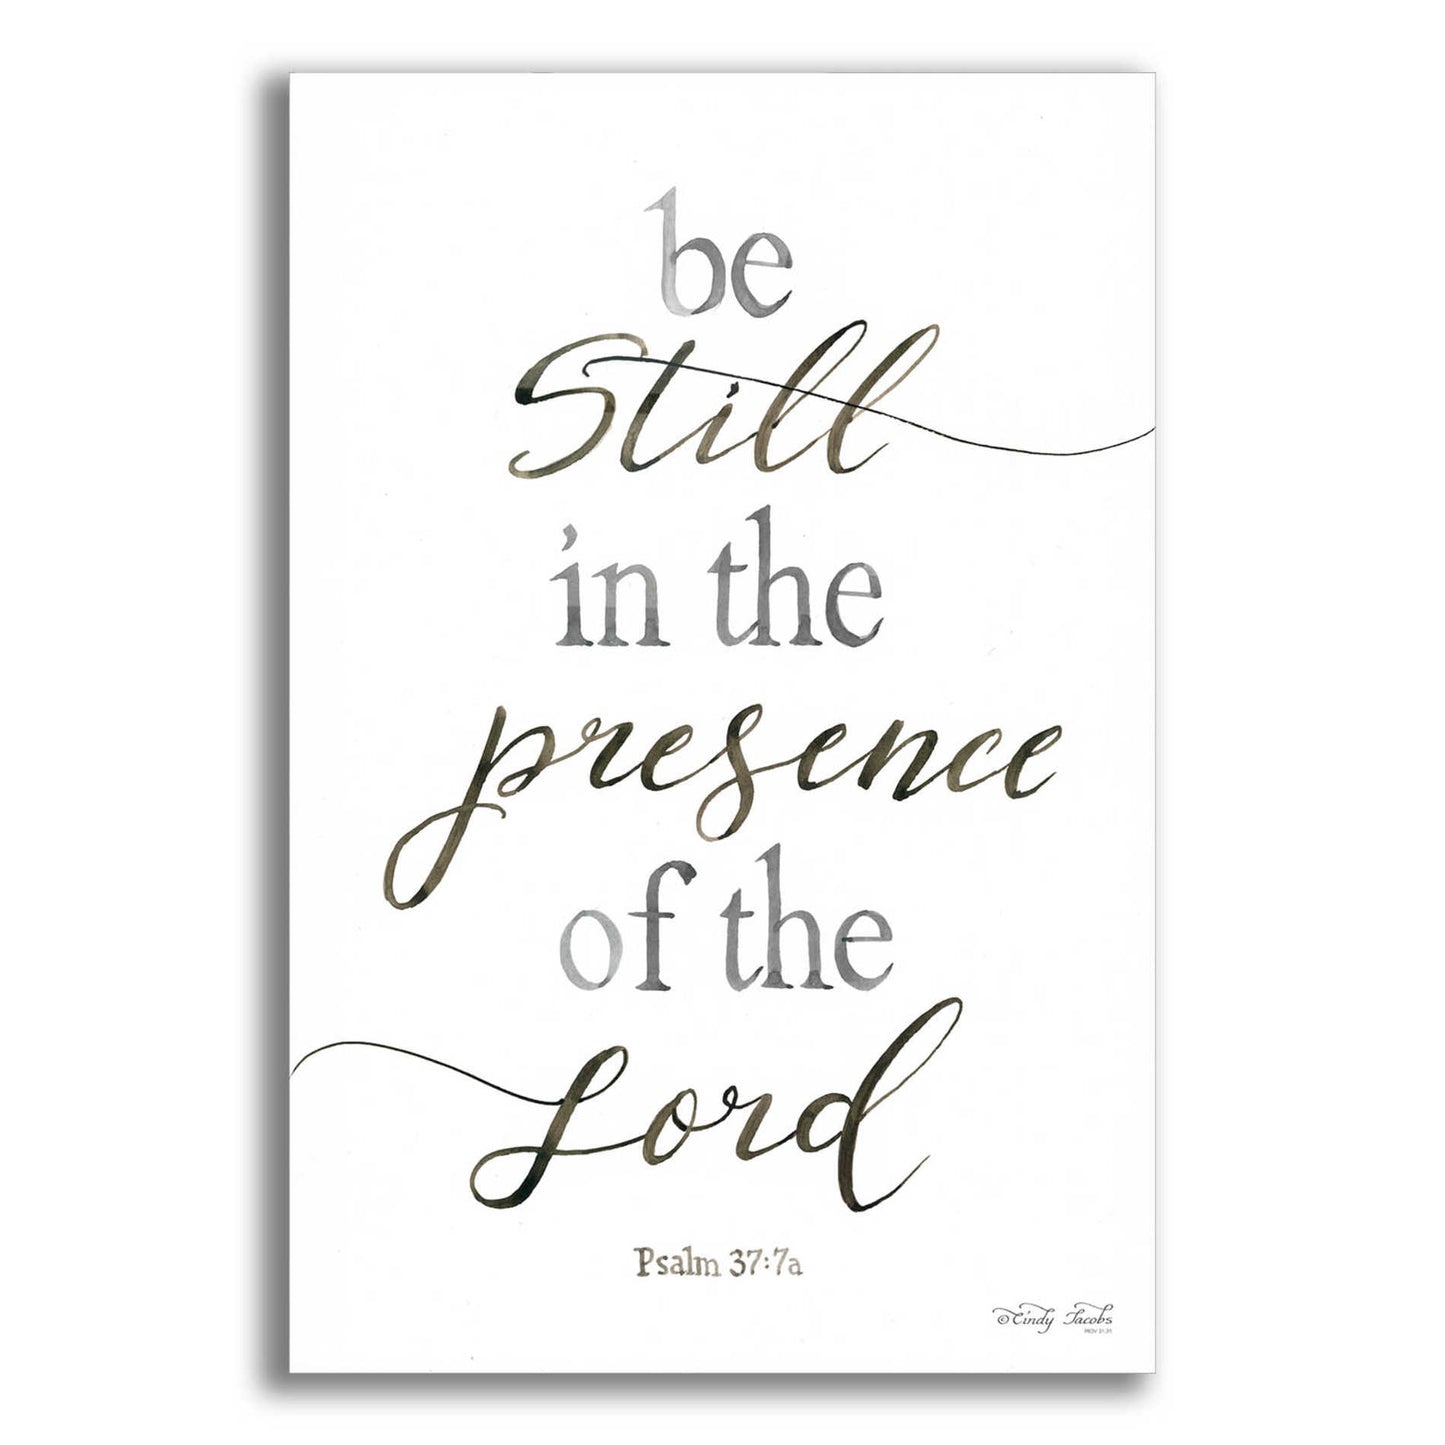 Epic Art 'Be Still in the Presence of the Lord' by Cindy Jacobs, Acrylic Glass Wall Art,12x16